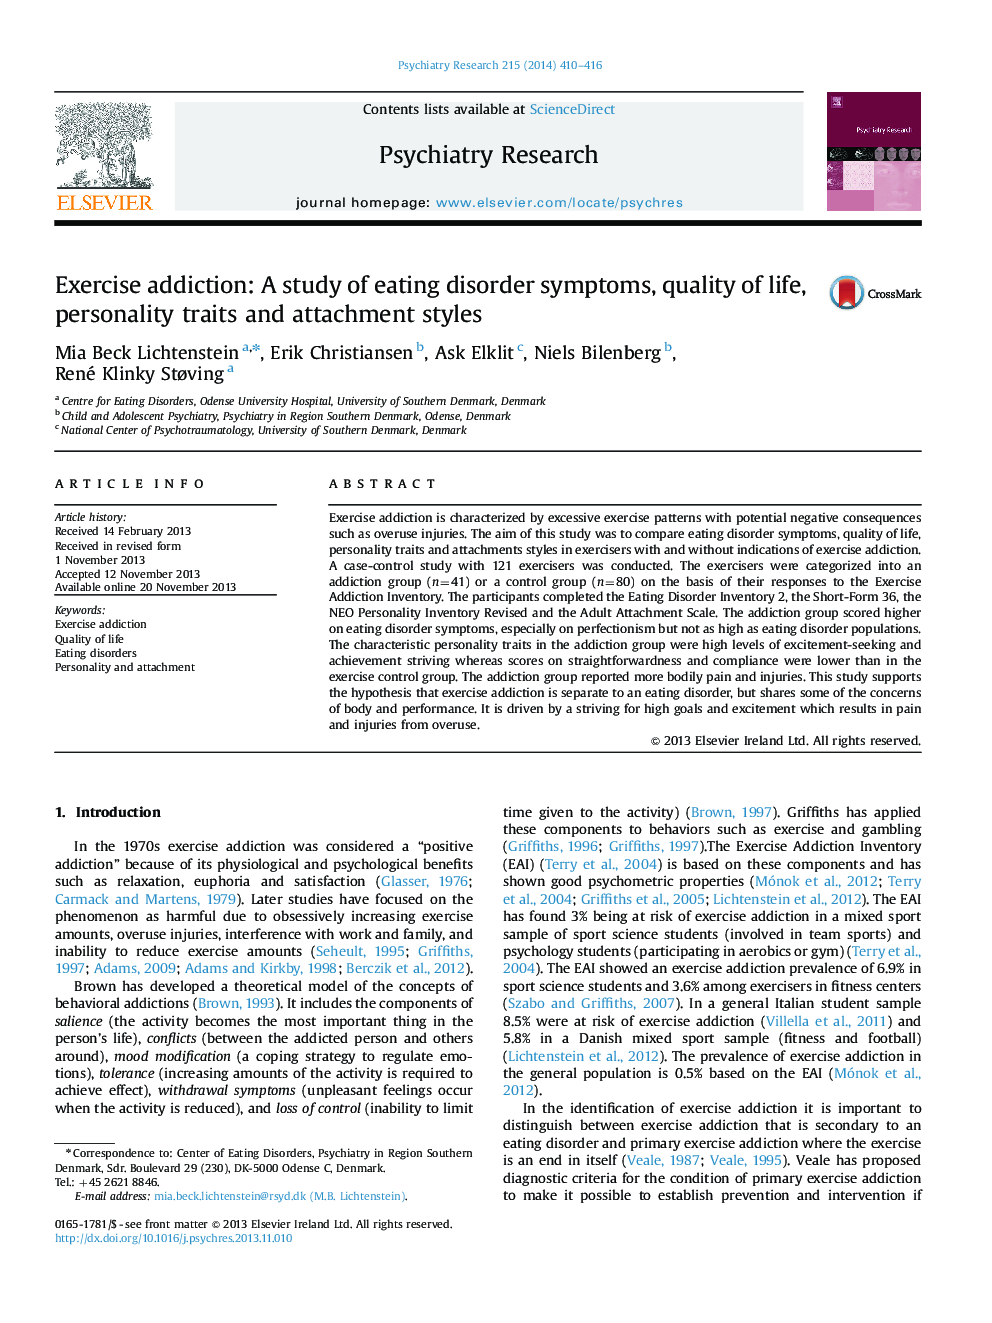 Exercise addiction: A study of eating disorder symptoms, quality of life, personality traits and attachment styles